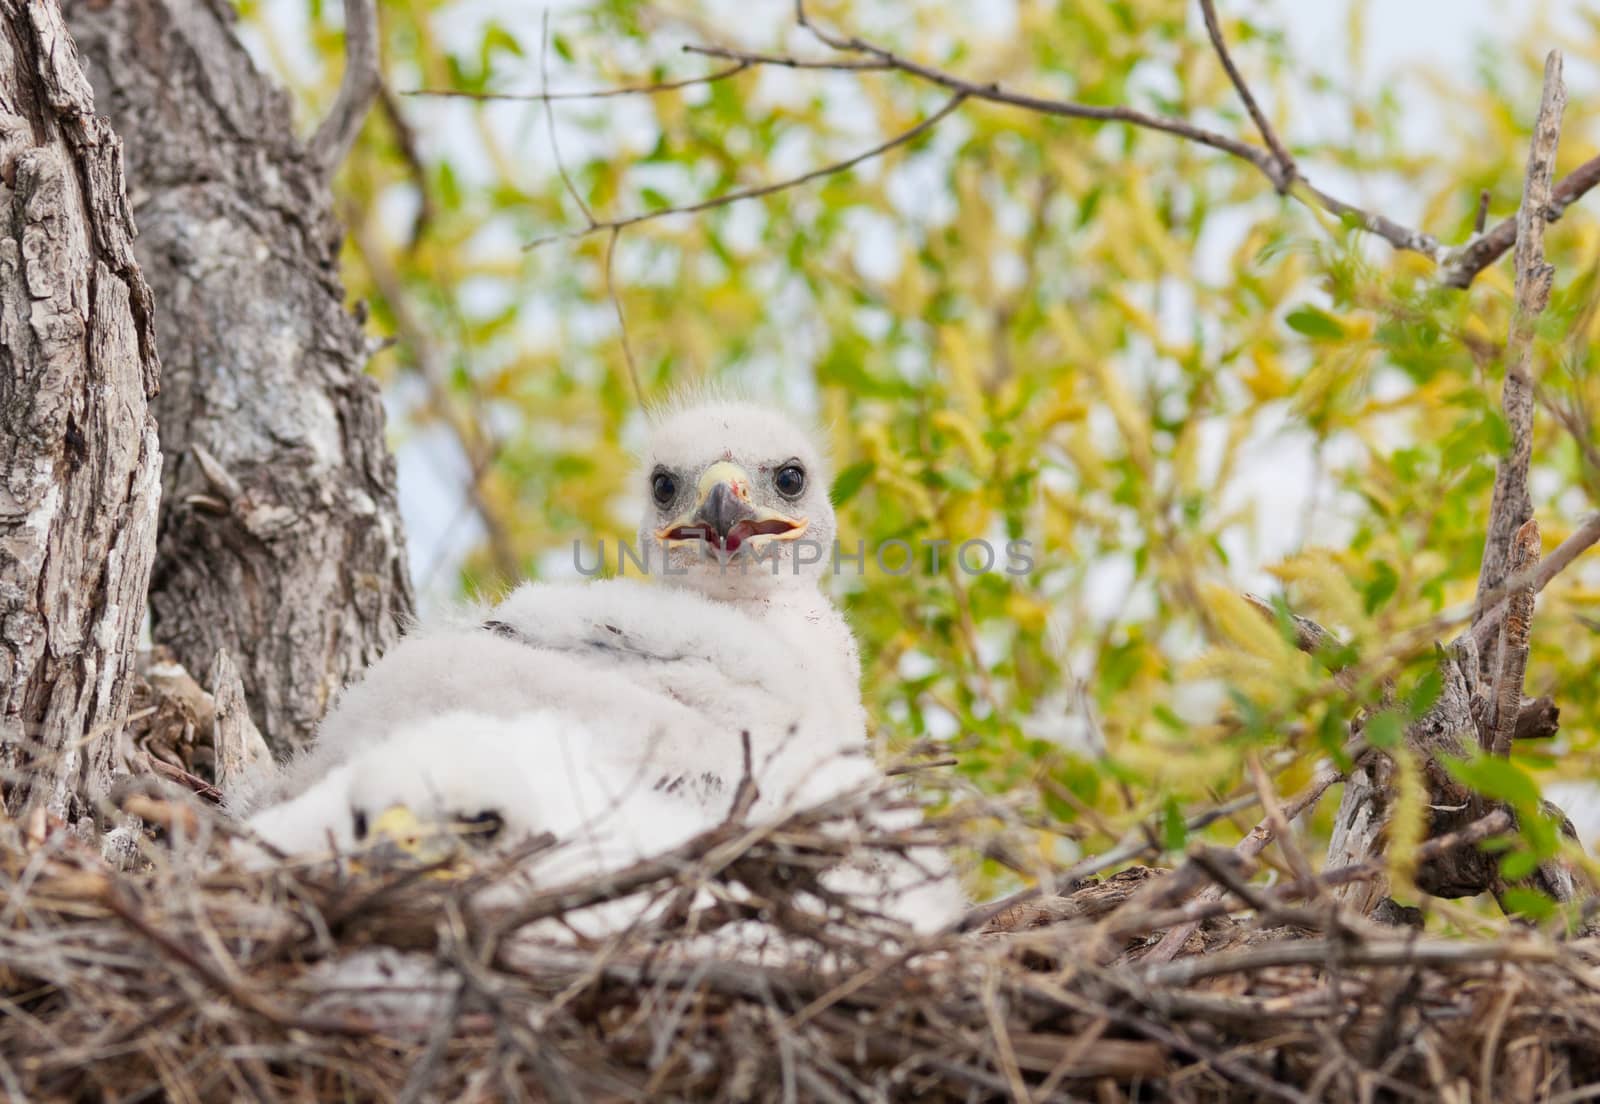 Young Ferruginous hawk chicks in their nest with traces of blood from their last meal.  Focus on chick sitting up.